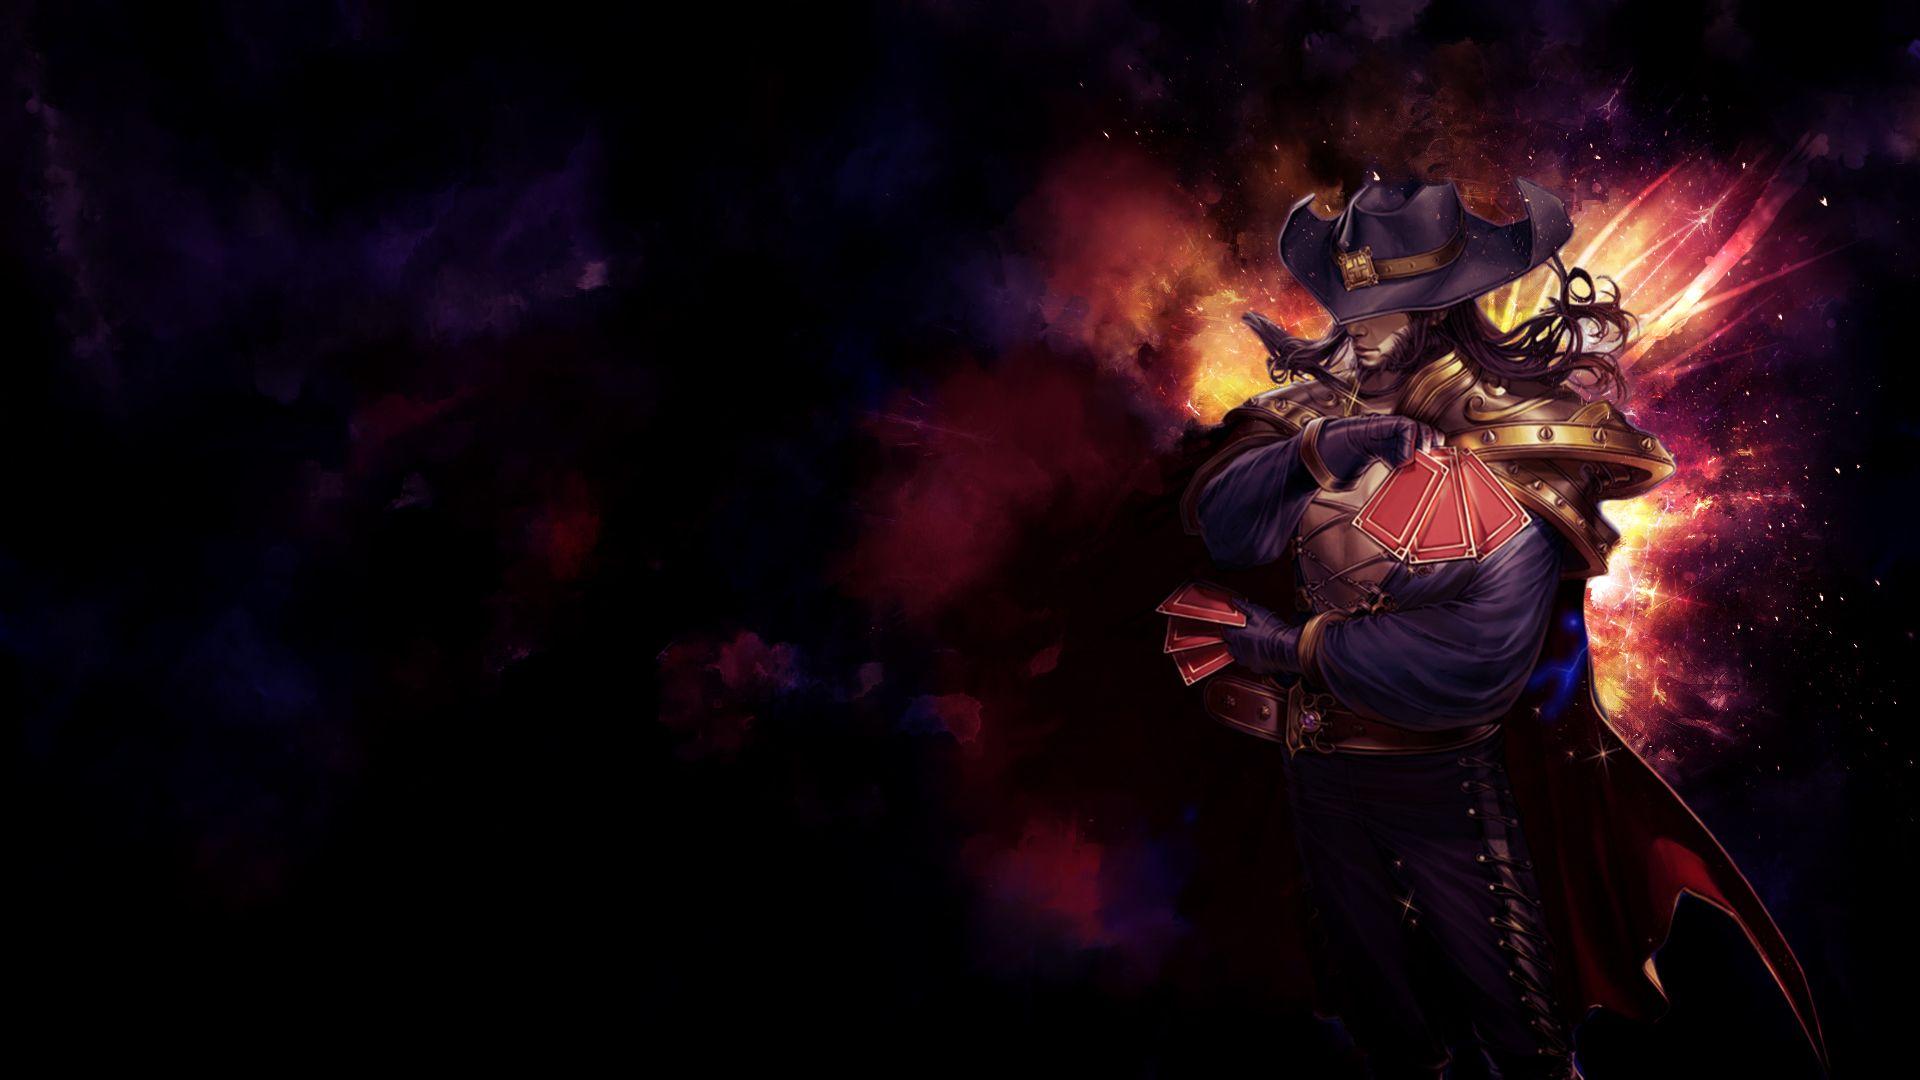 twisted fate wallpaper 1920x1080